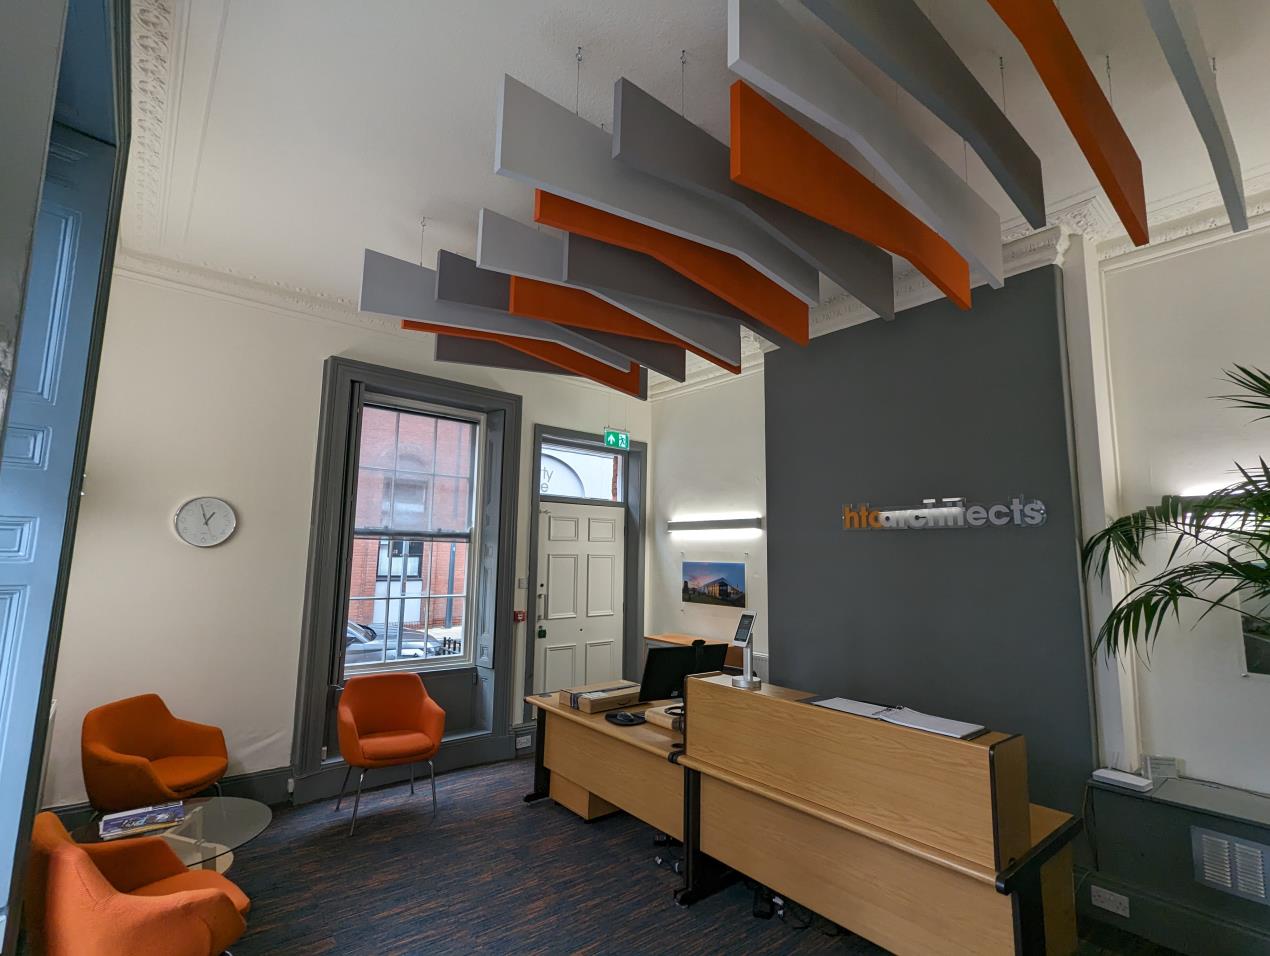 ZENTIA’S SONIFY RANGE OF ACOUSTIC BAFFLES USED AT HTC ARCHITECTS OFFICE REFURBISHMENT